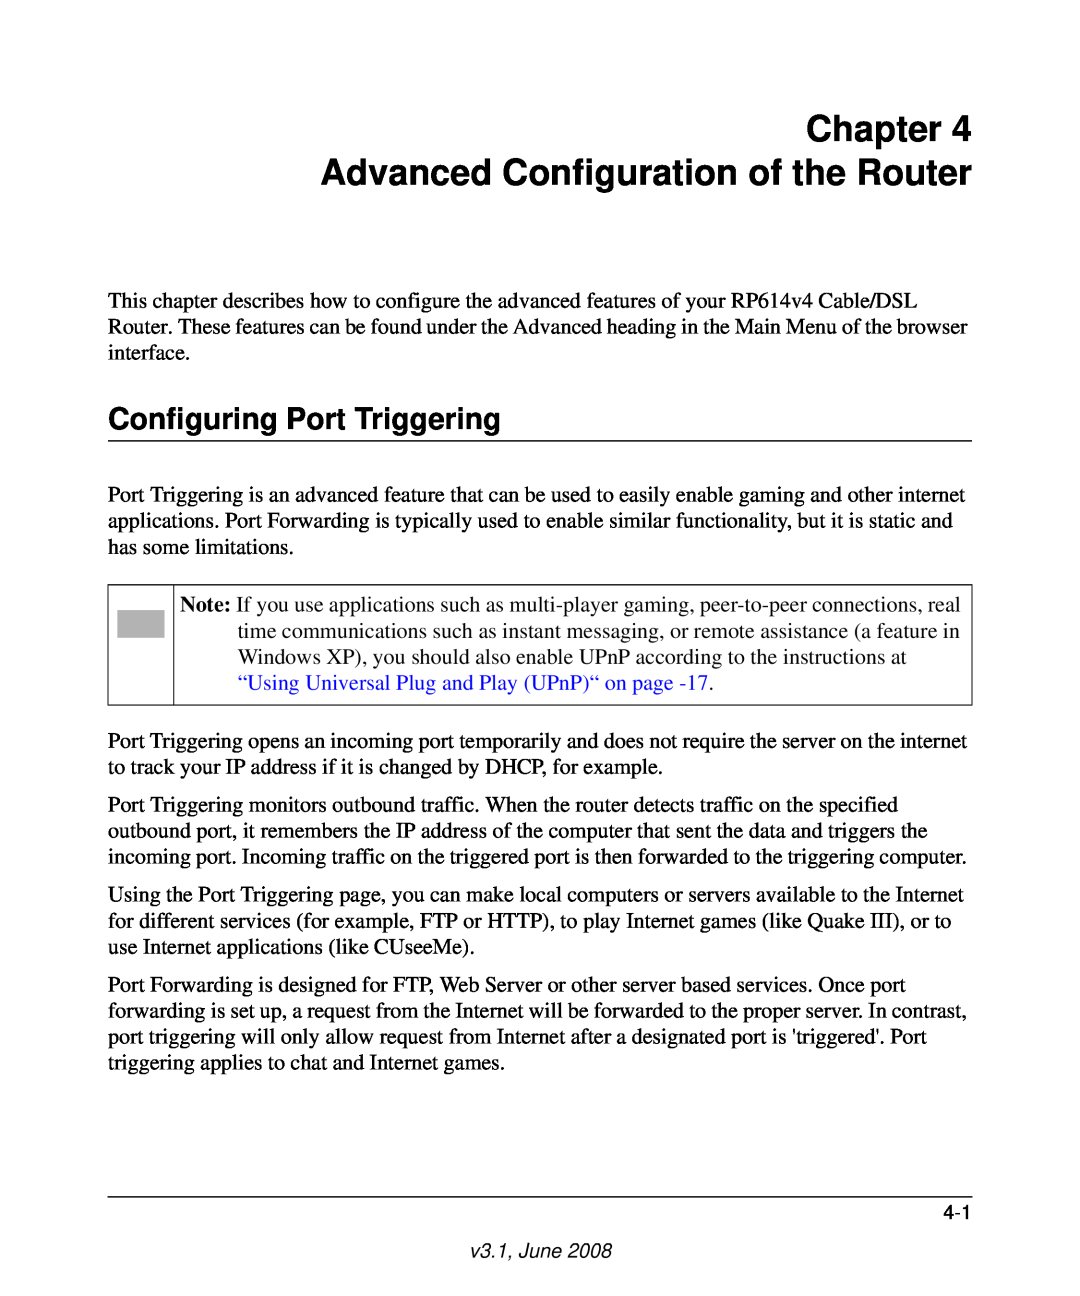 NETGEAR RP614 v4 manual Advanced Configuration of the Router, Configuring Port Triggering 